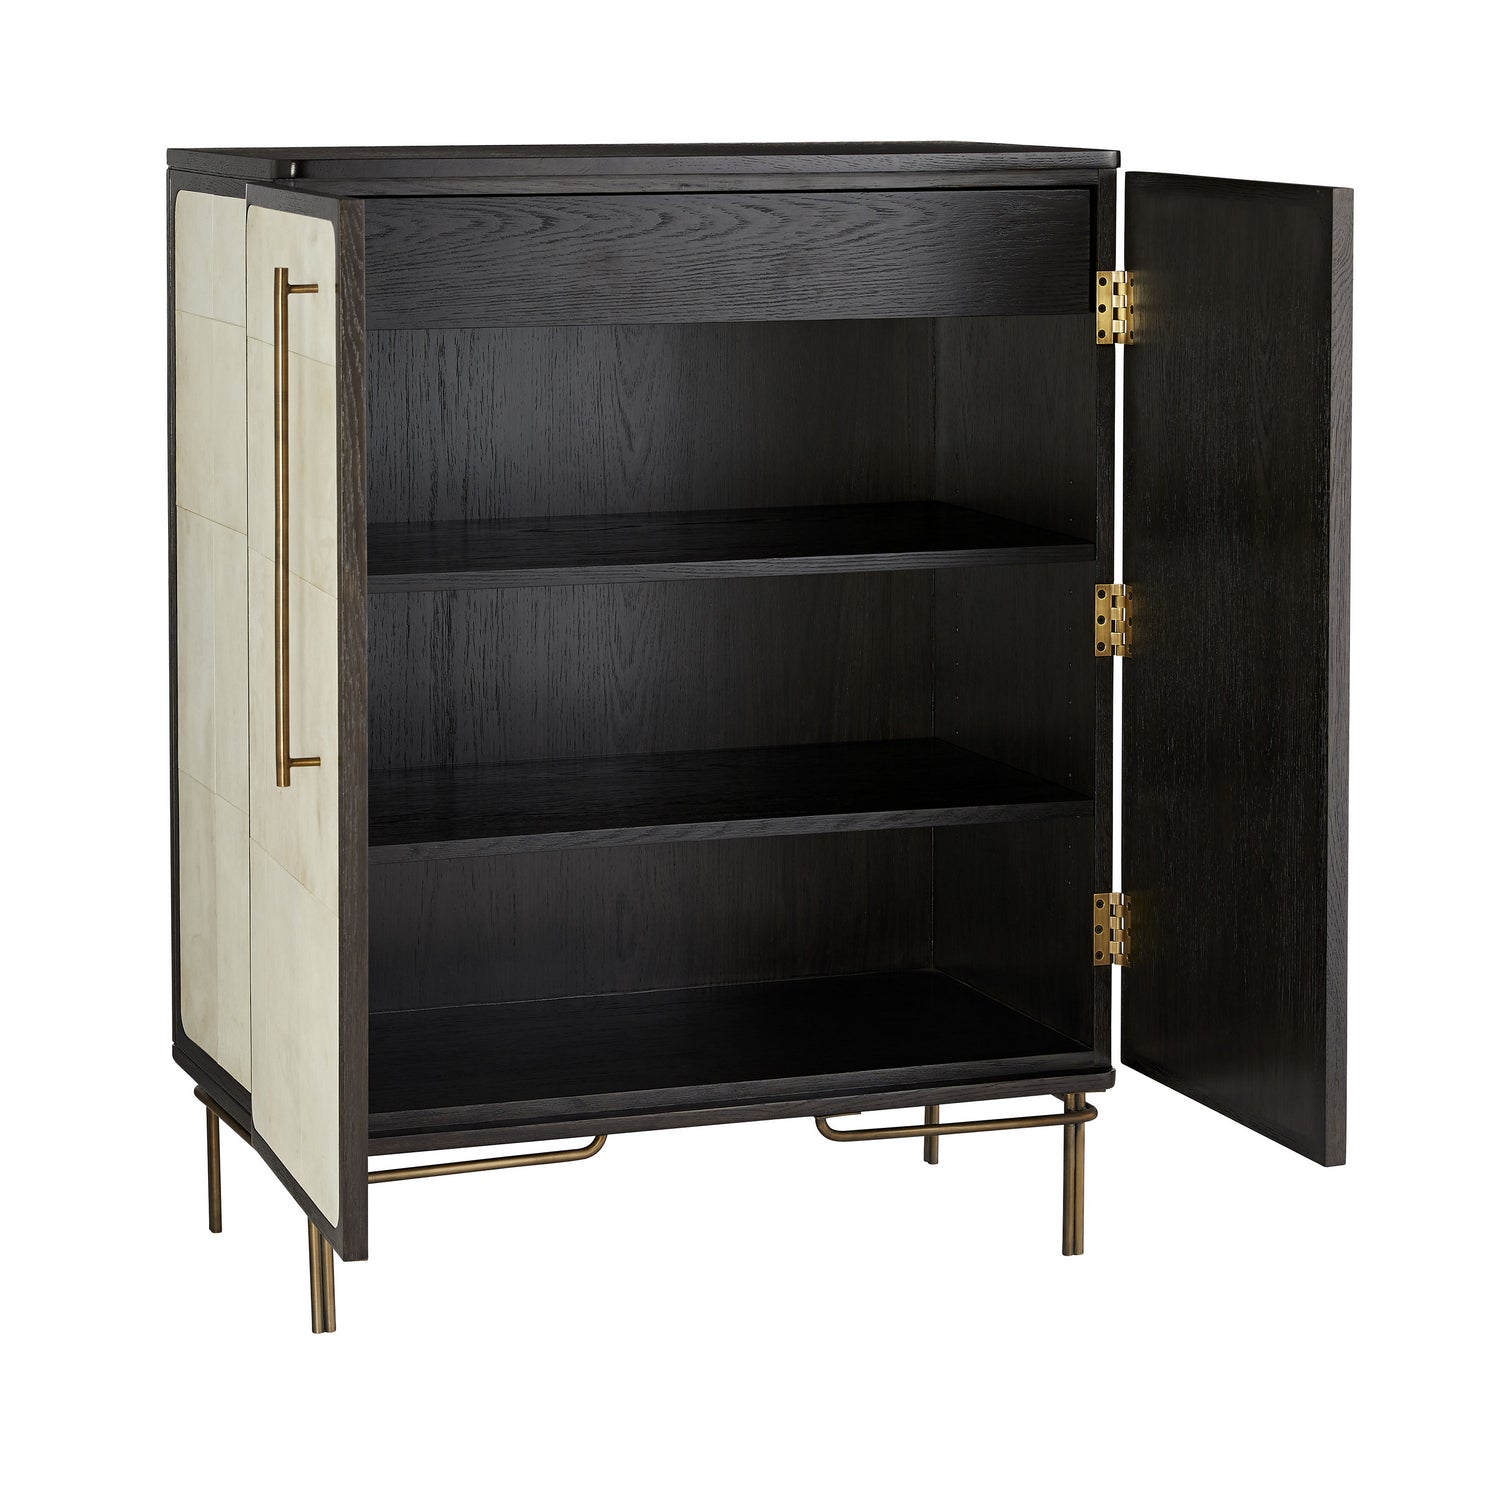 Cabinet from the Edison collection in Ebony finish